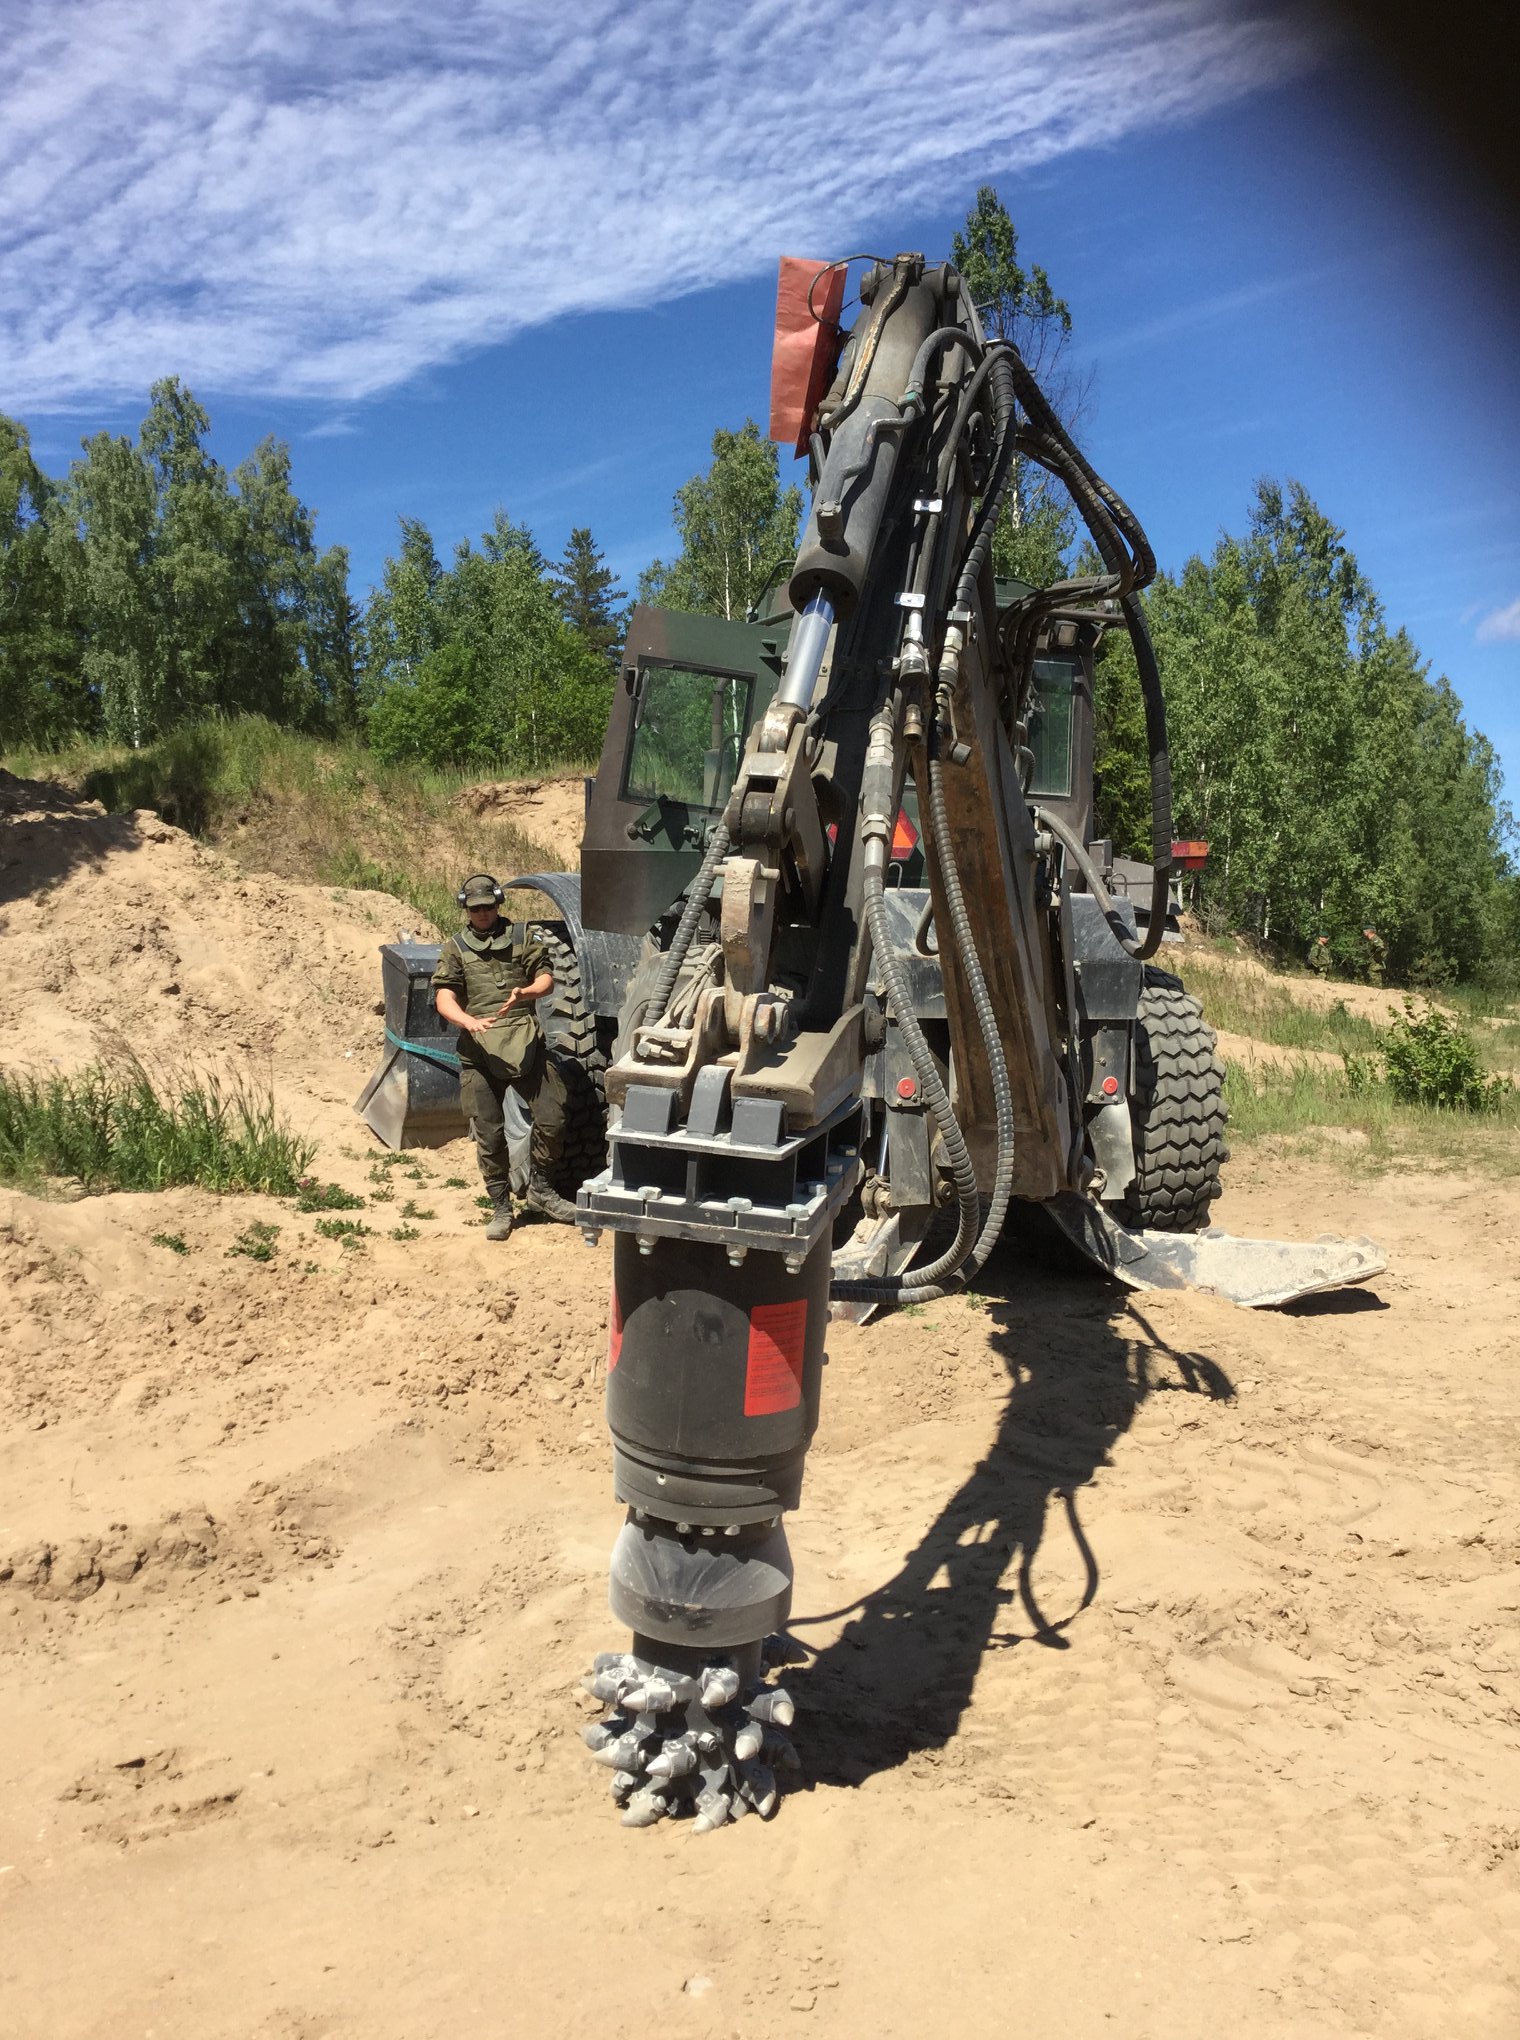 A minesdrill is a spiked large drill attached to an excavator-type vehicle